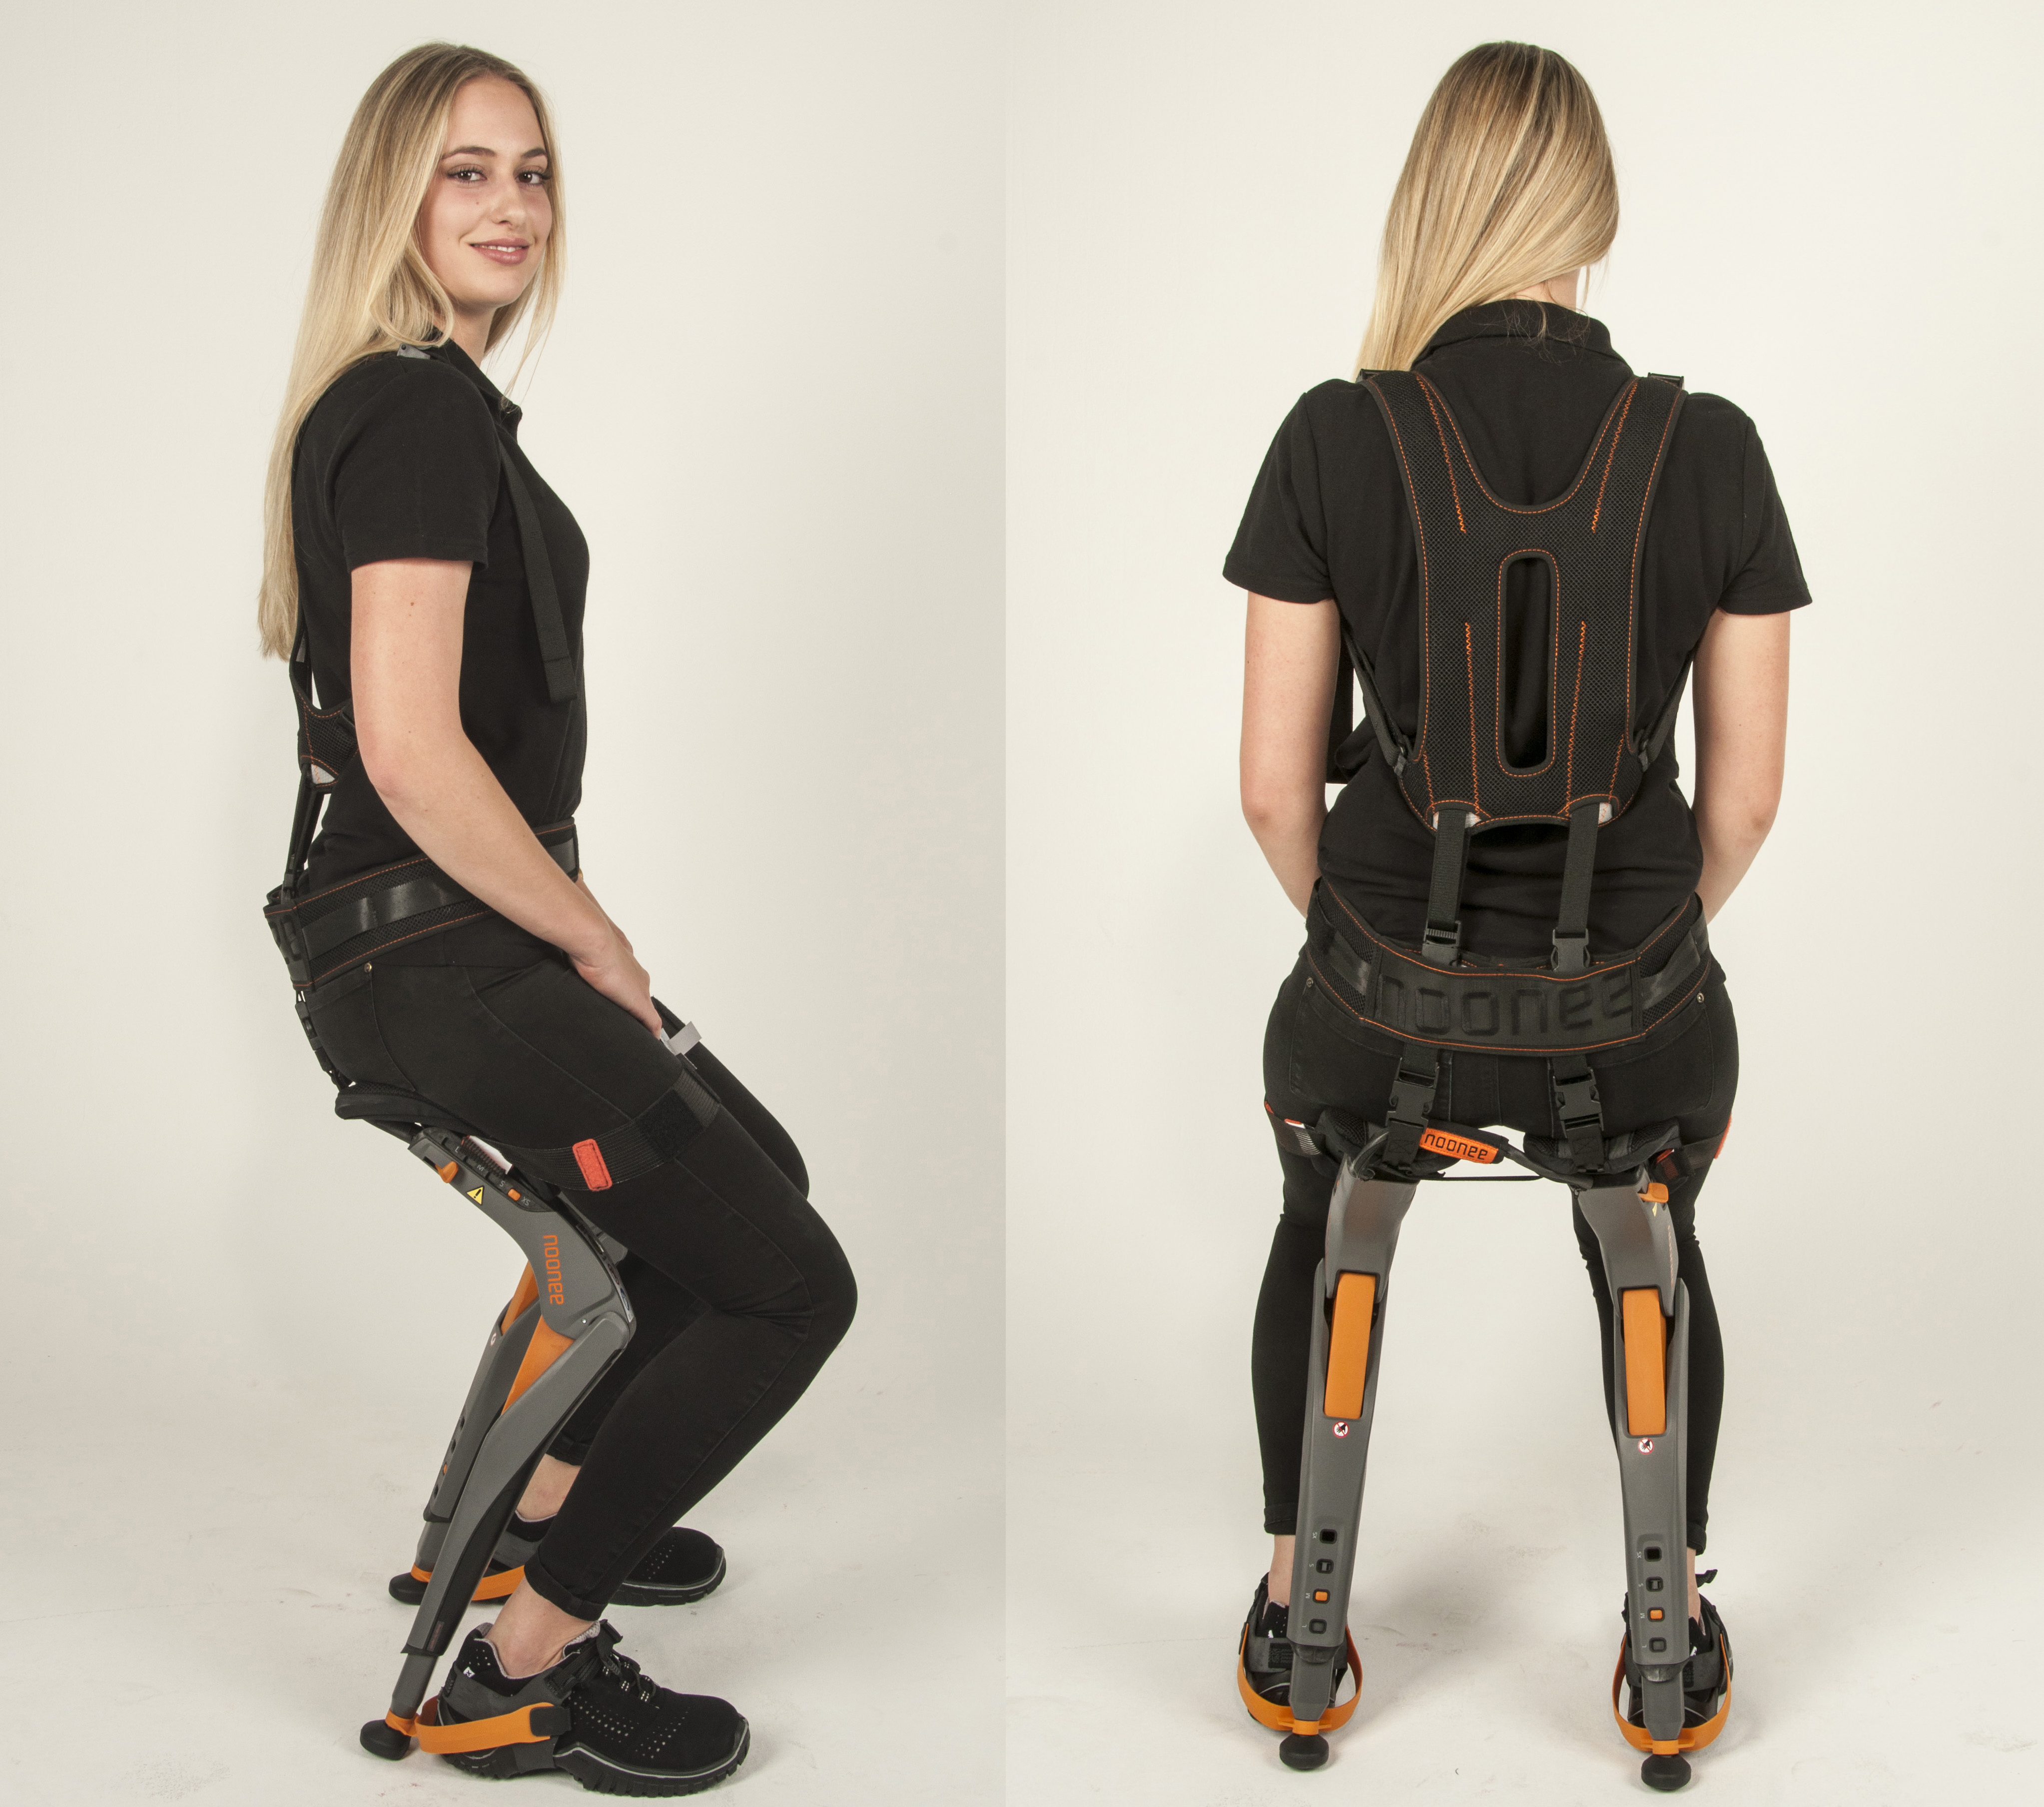 Chairless Chair A Wearable Device That Will Let You Sit Anywhere You Want The Irish News